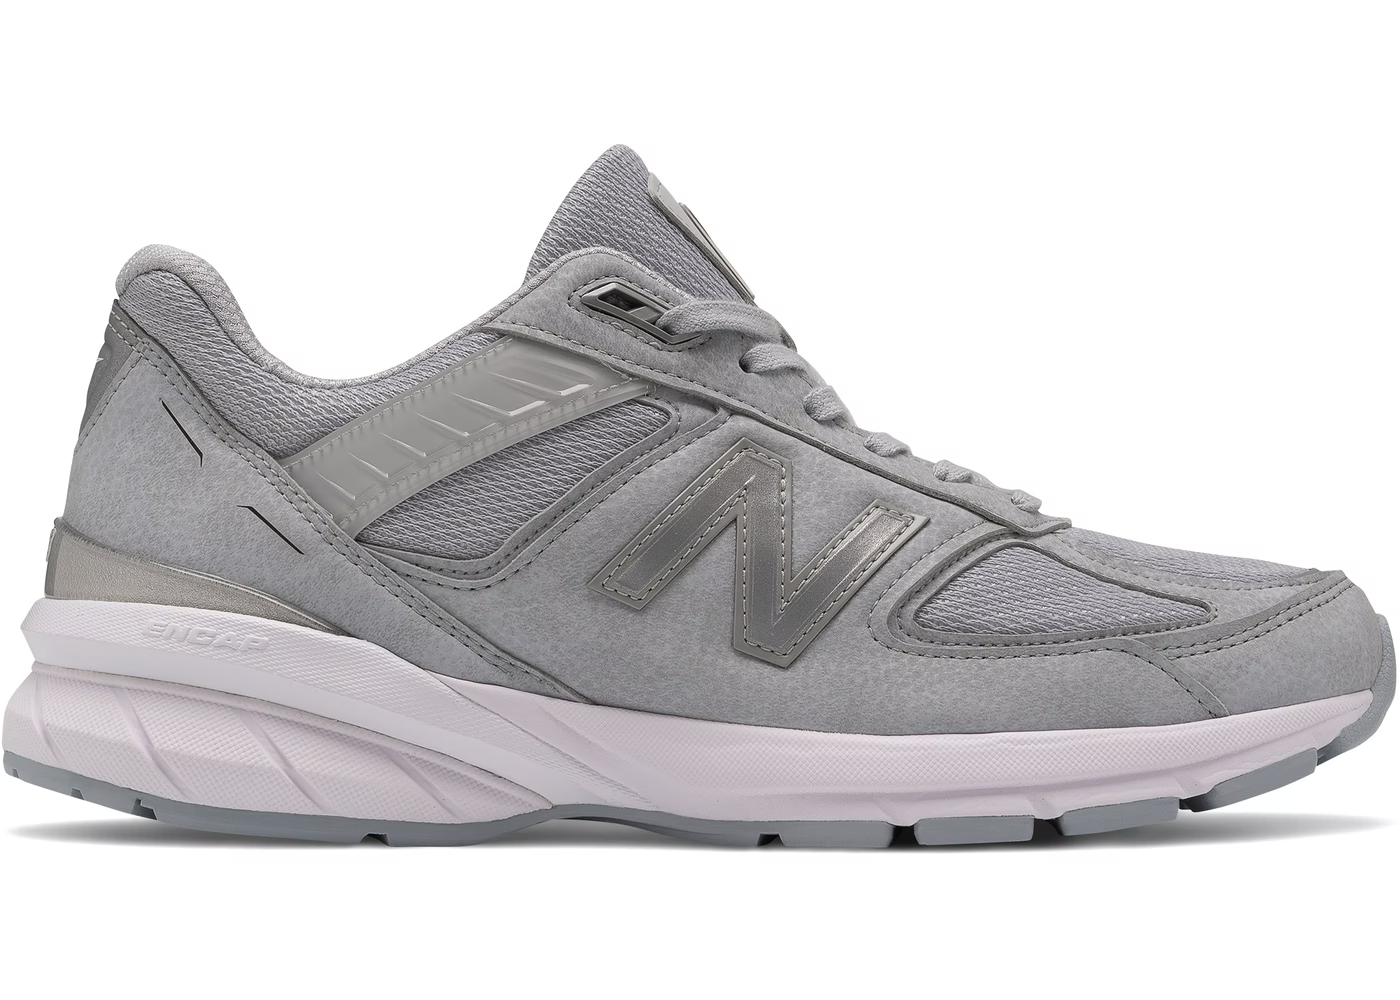 Now Available: New Balance 990v5 